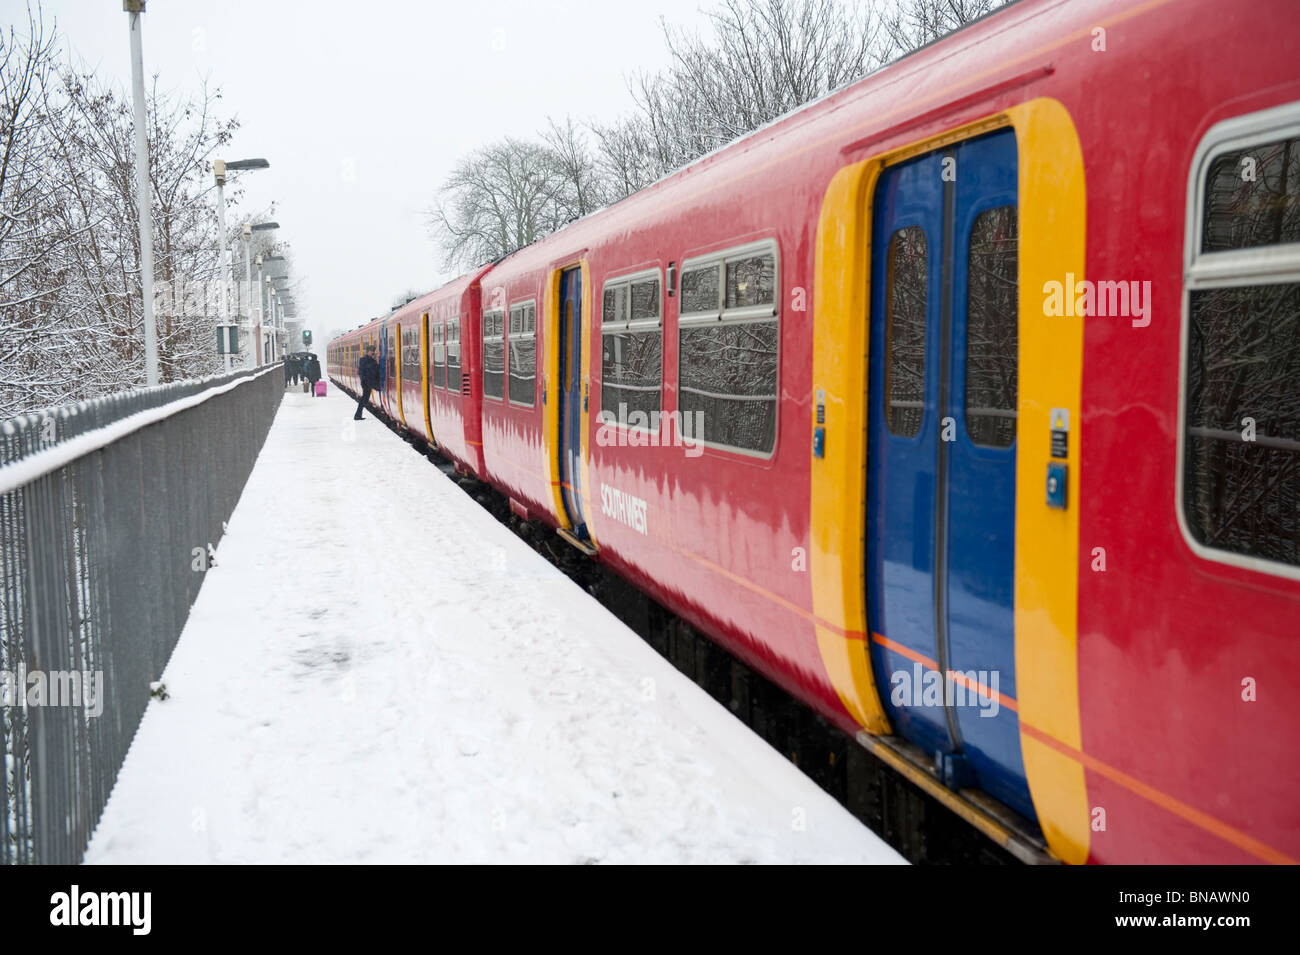 A commuter South West train standing at station on a snowy day Stock Photo